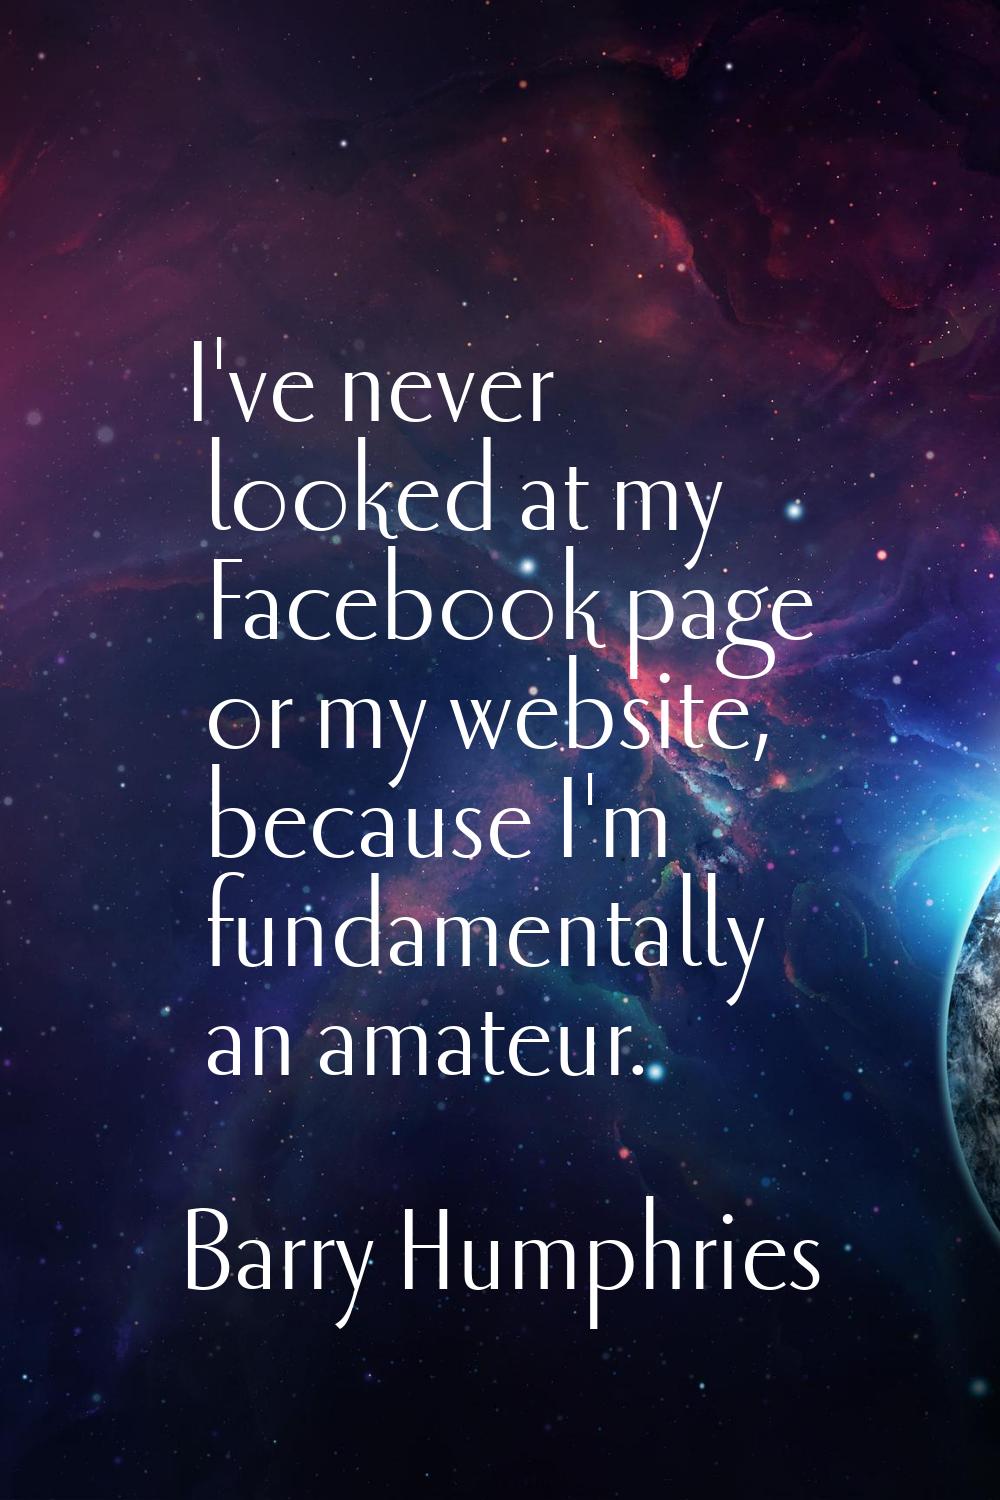 I've never looked at my Facebook page or my website, because I'm fundamentally an amateur.